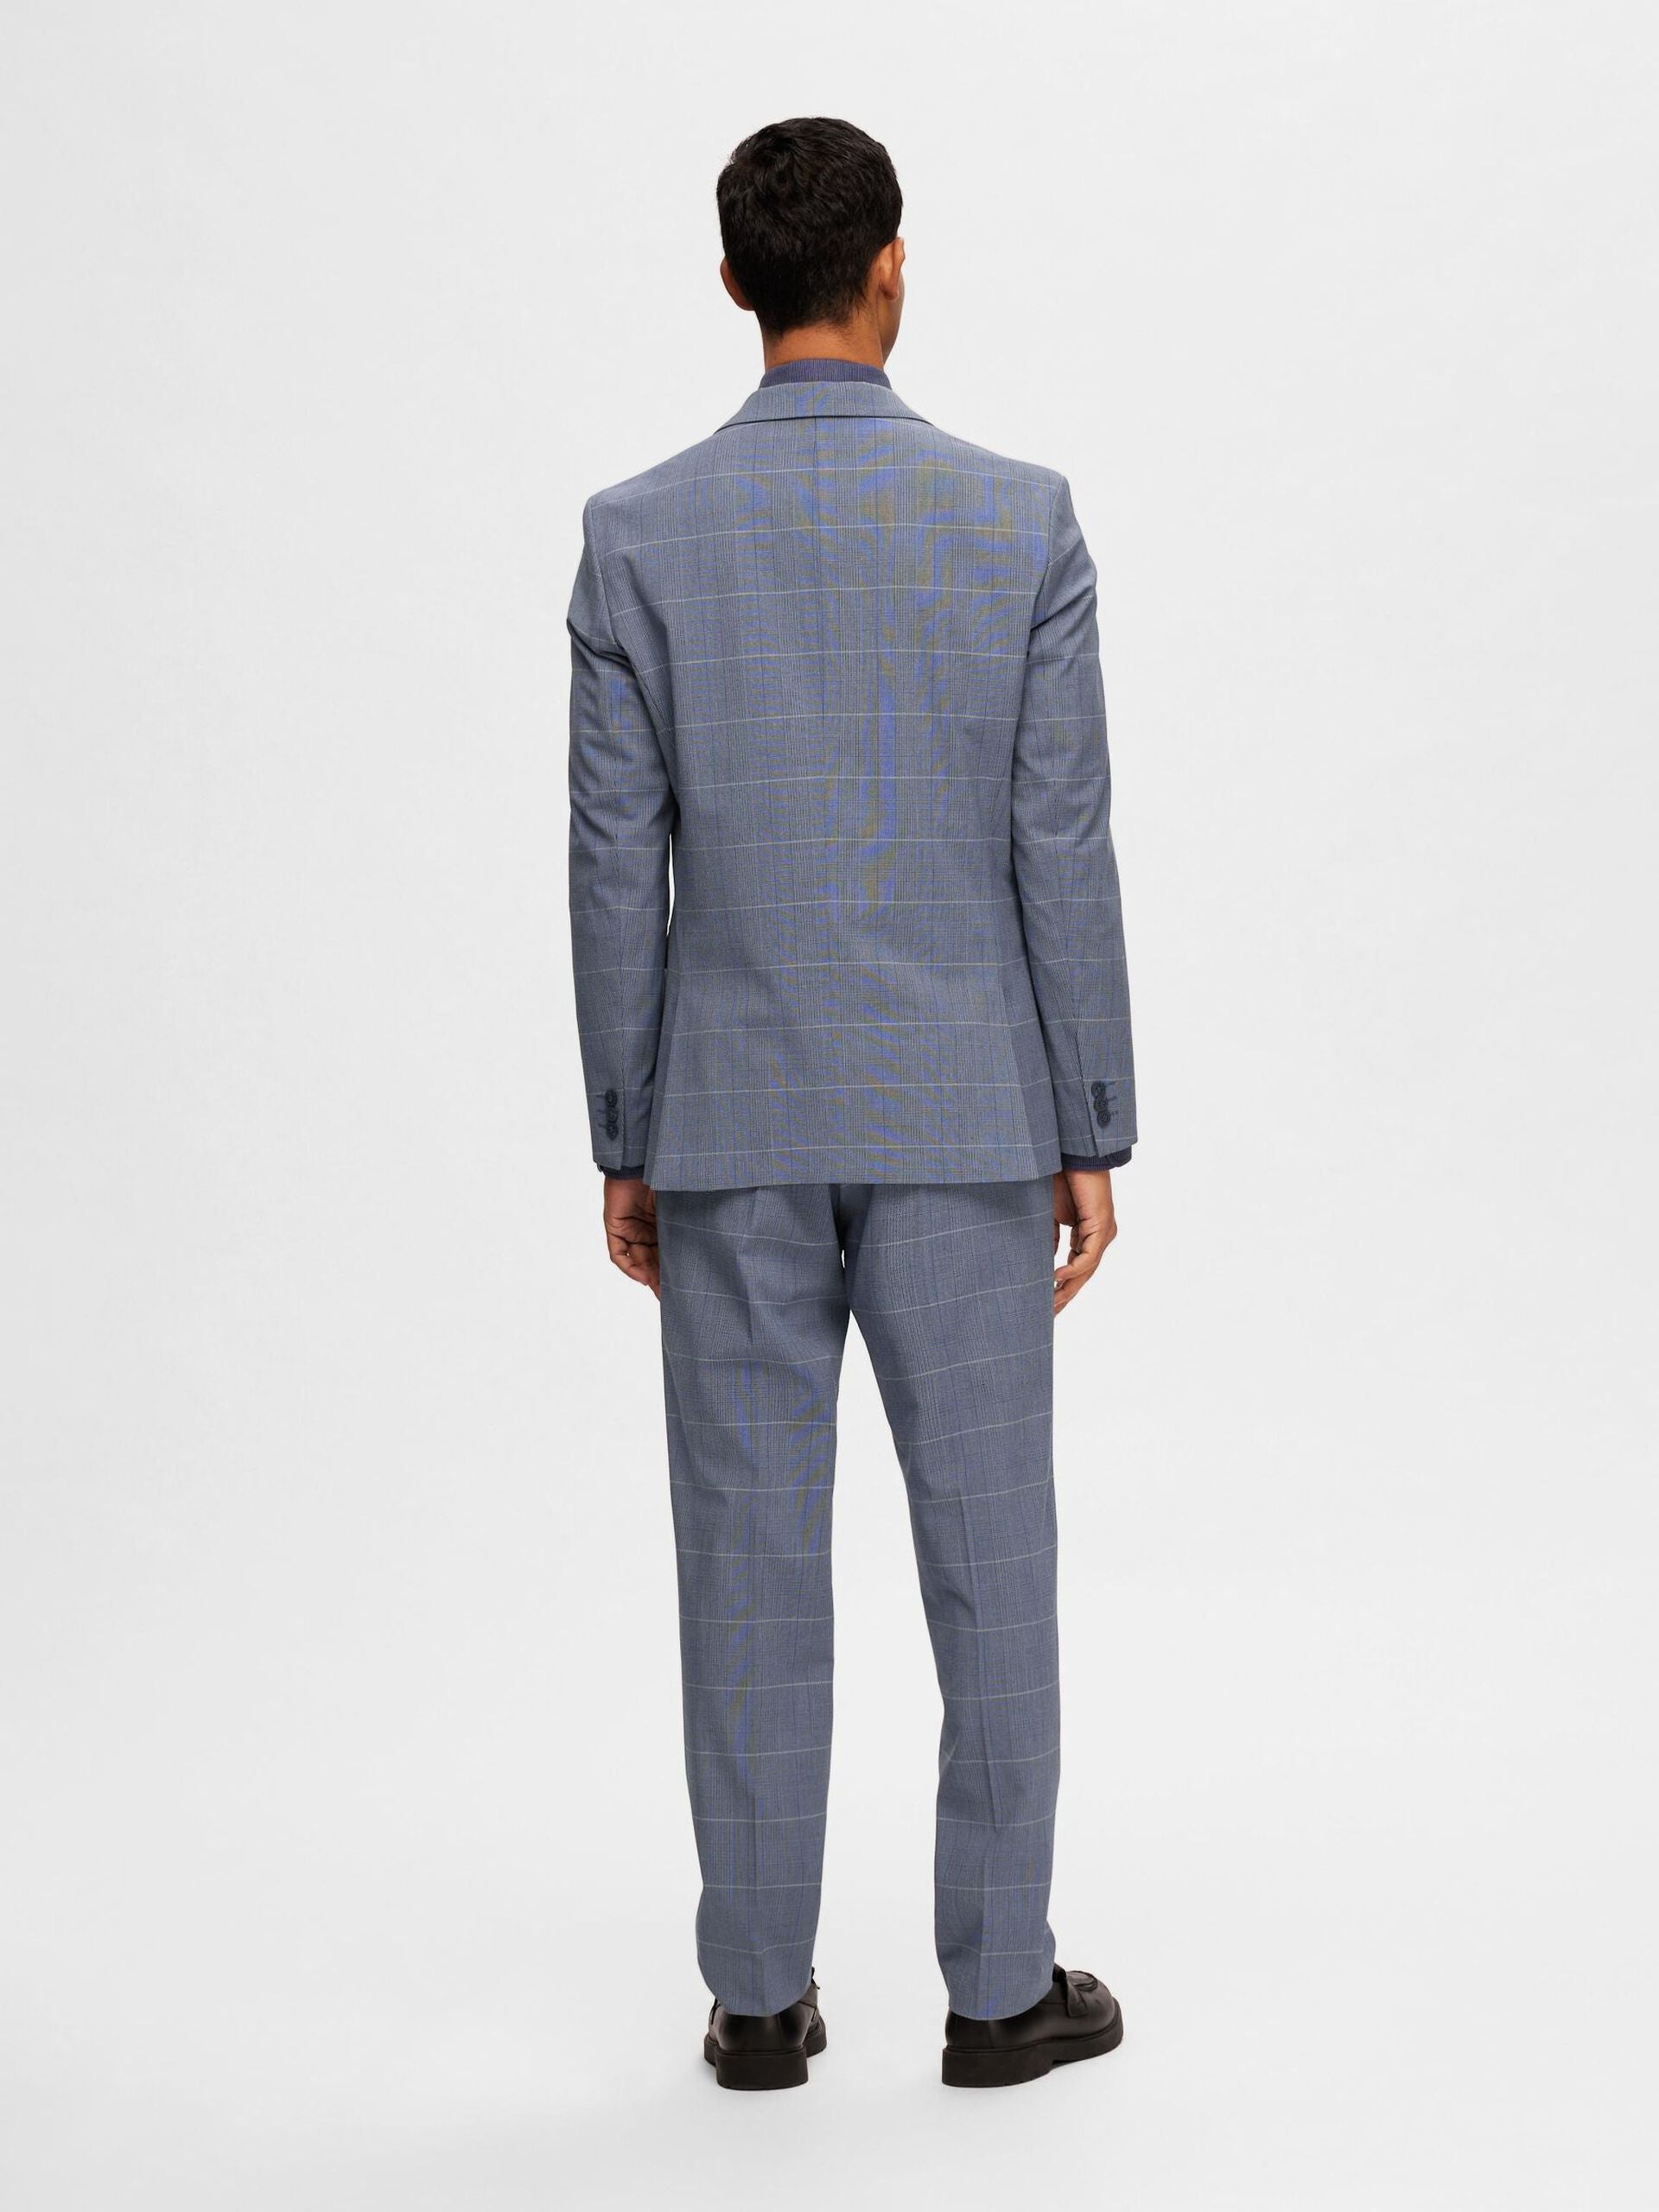 SELECTED | BLAZER - Slim Fit | Blue Shadow Check